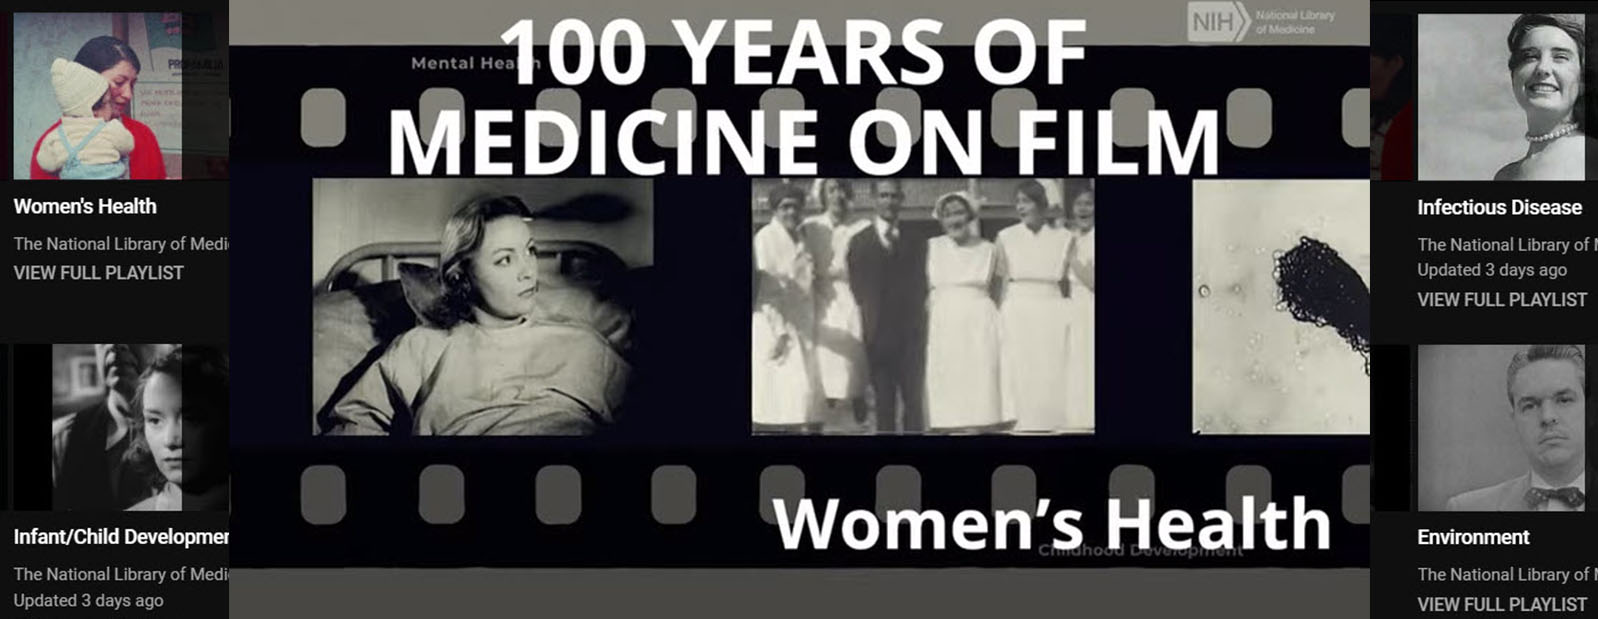 History of Medicine Section on NLM YouTube Channel